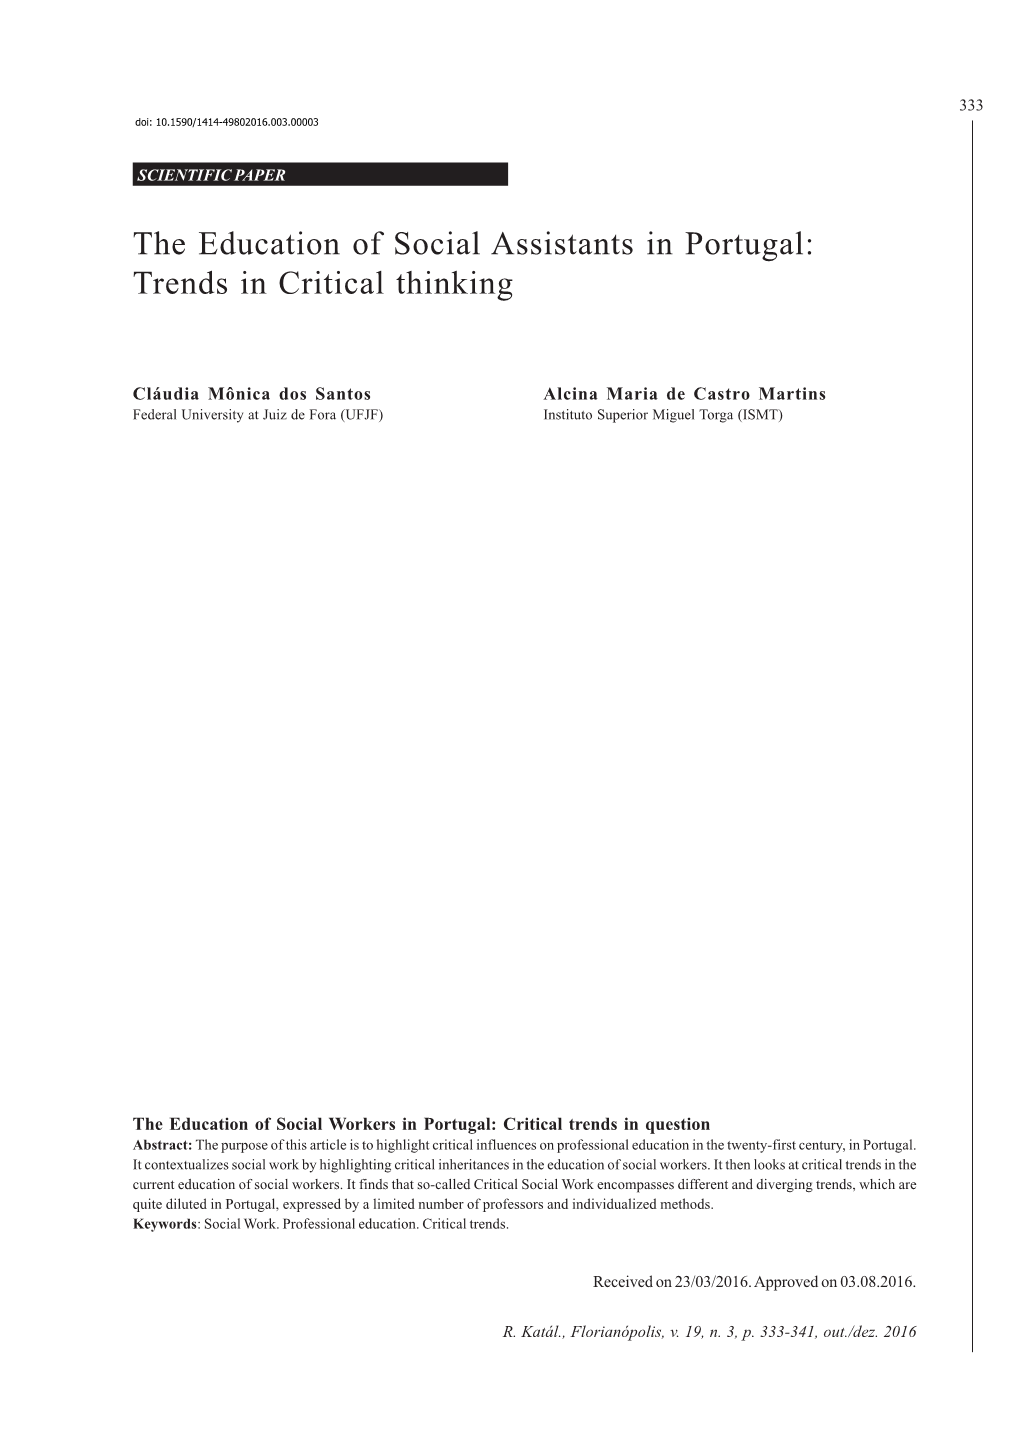 The Education of Social Assistants in Portugal: Trends in Critical Thinking